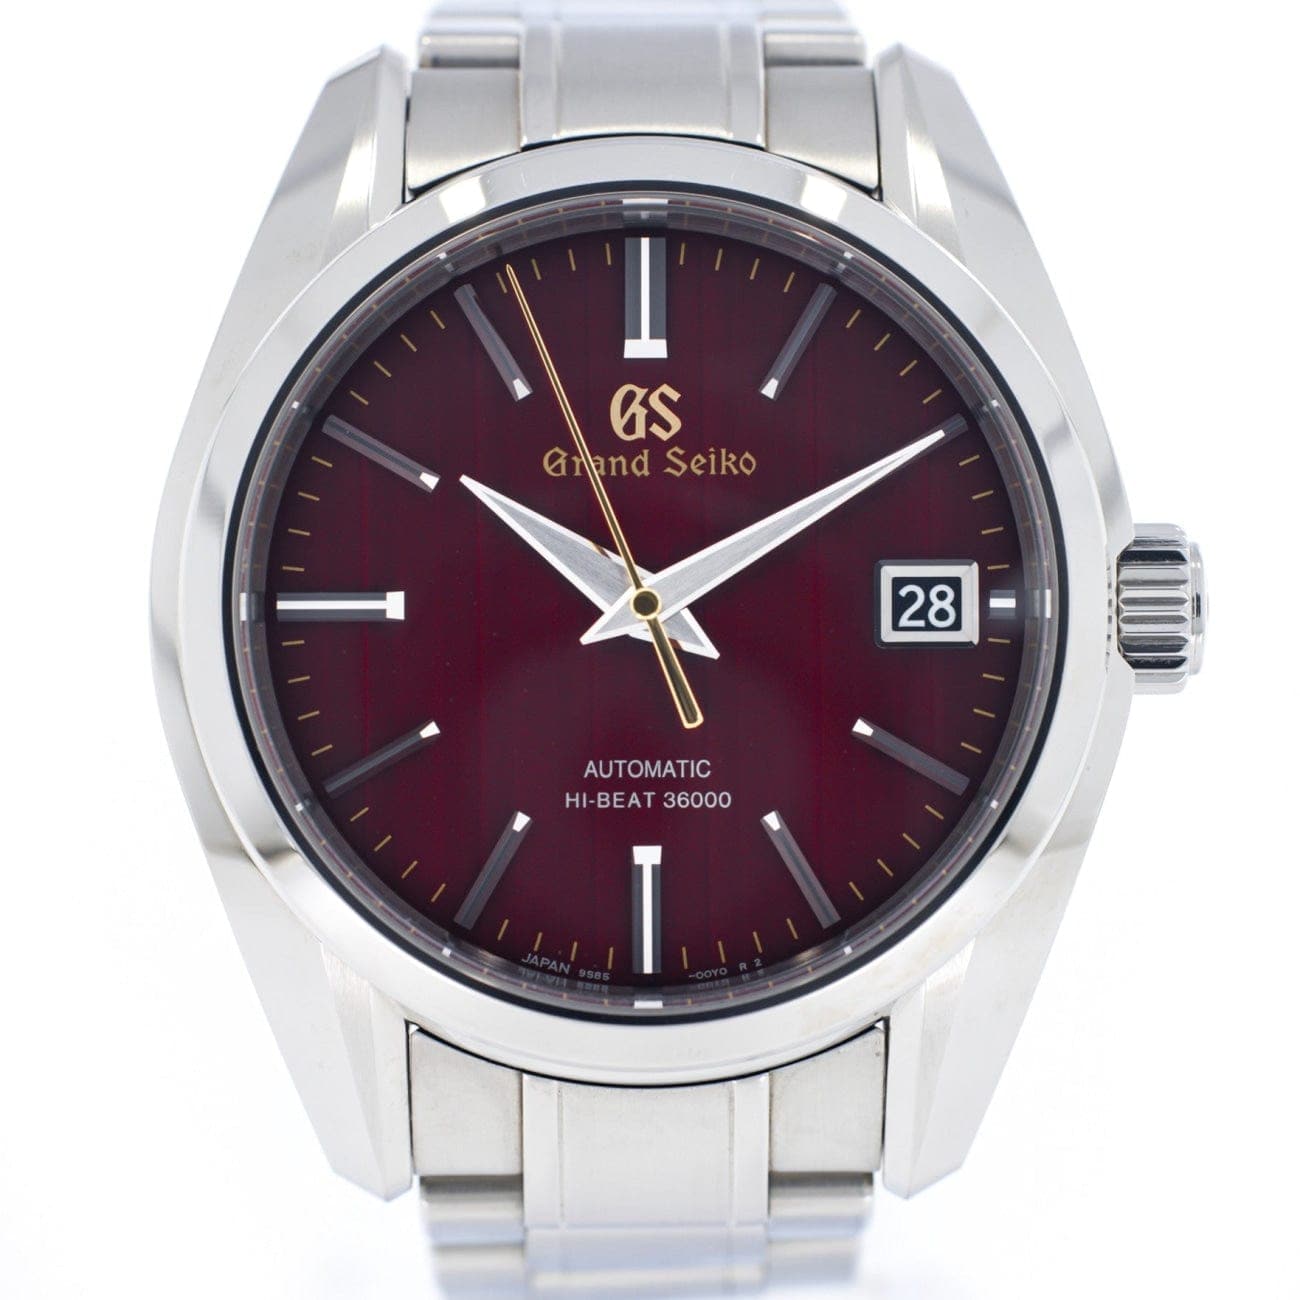 Pre-owned Grand Seiko Grand Seiko High -beat 36000 Limited Edition “ Autumn”  - Watches | Manfredi